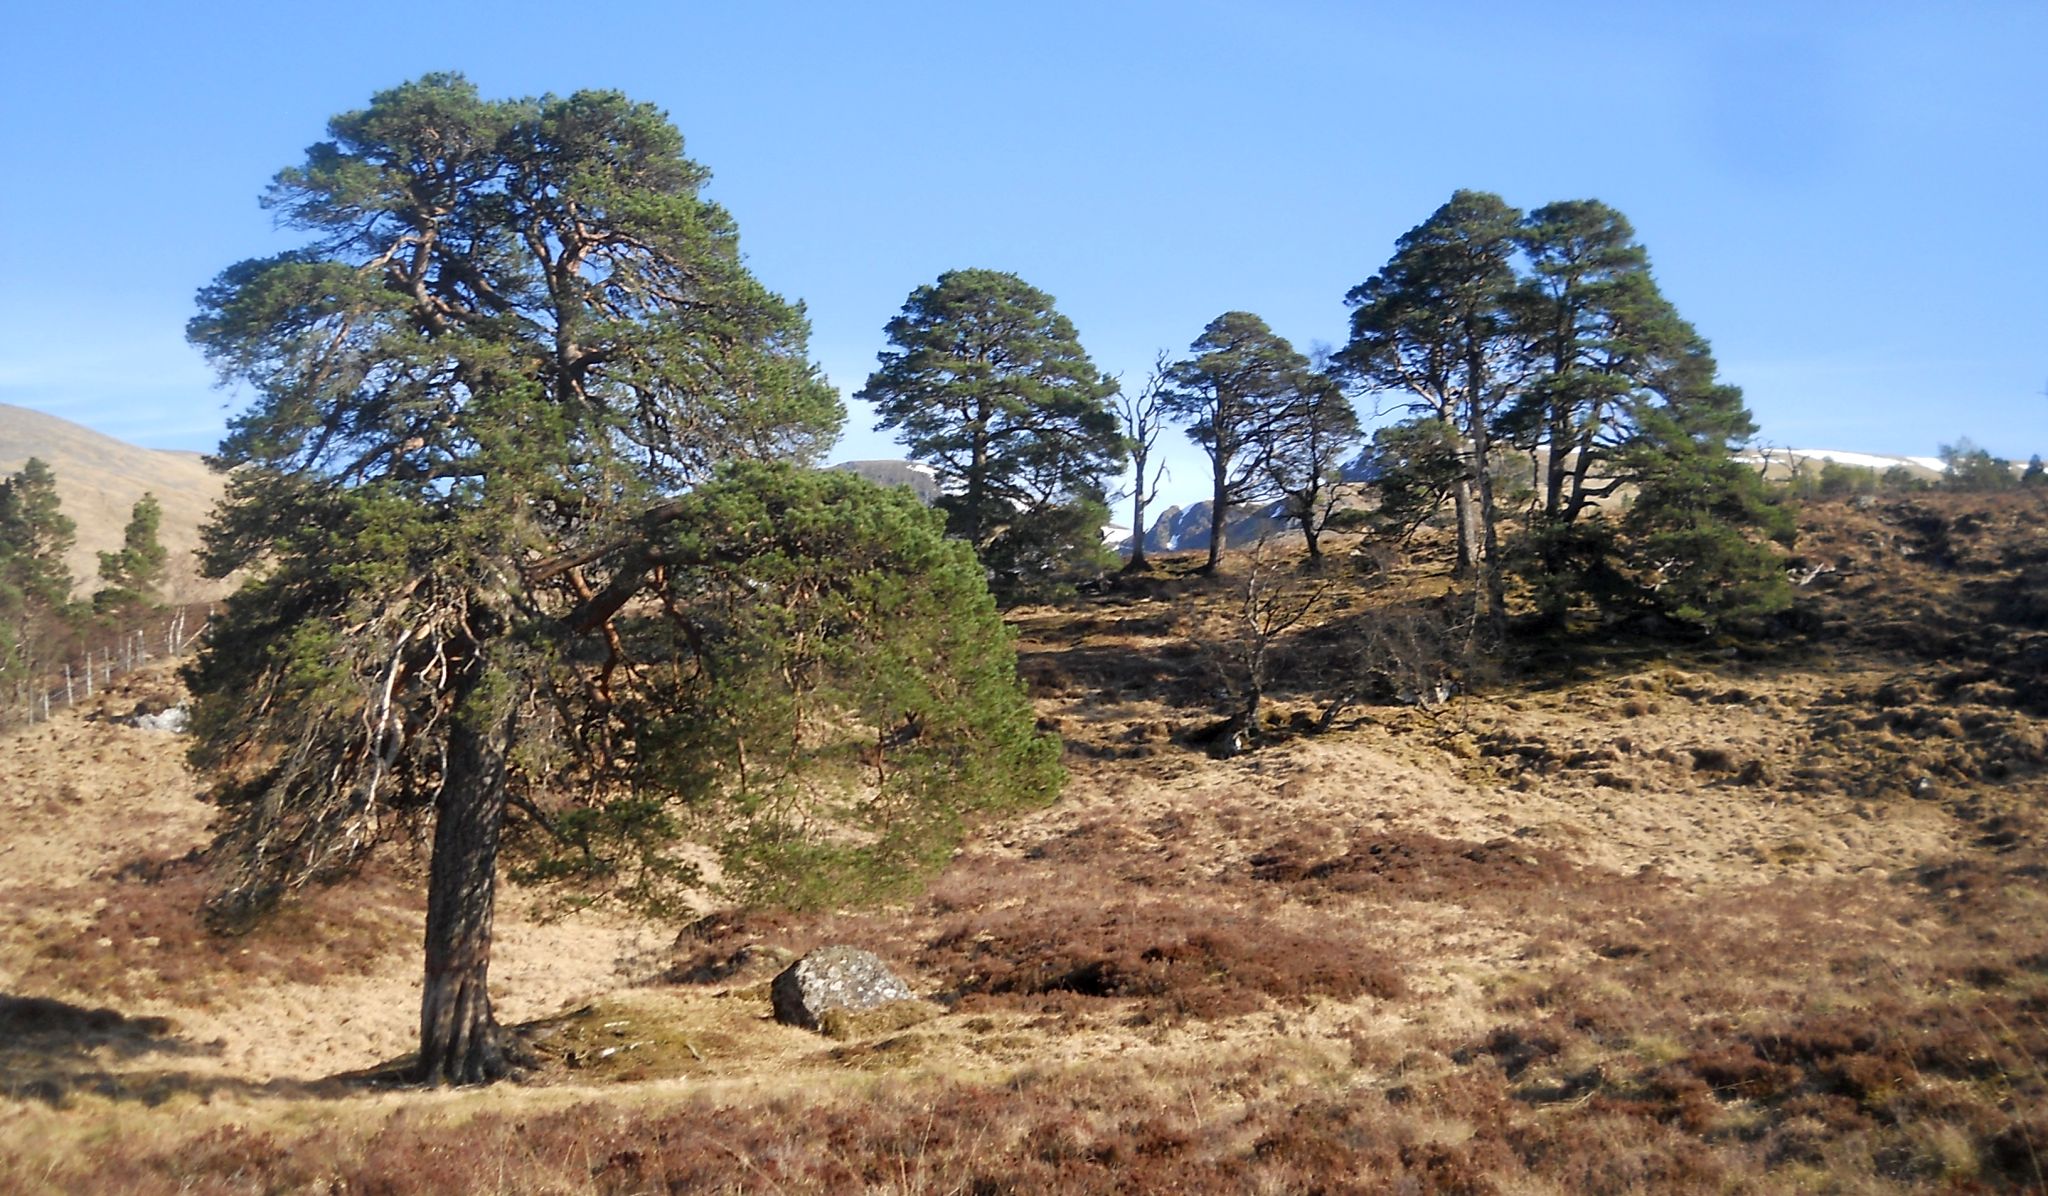 Pine trees of the Black Wood of Rannoch